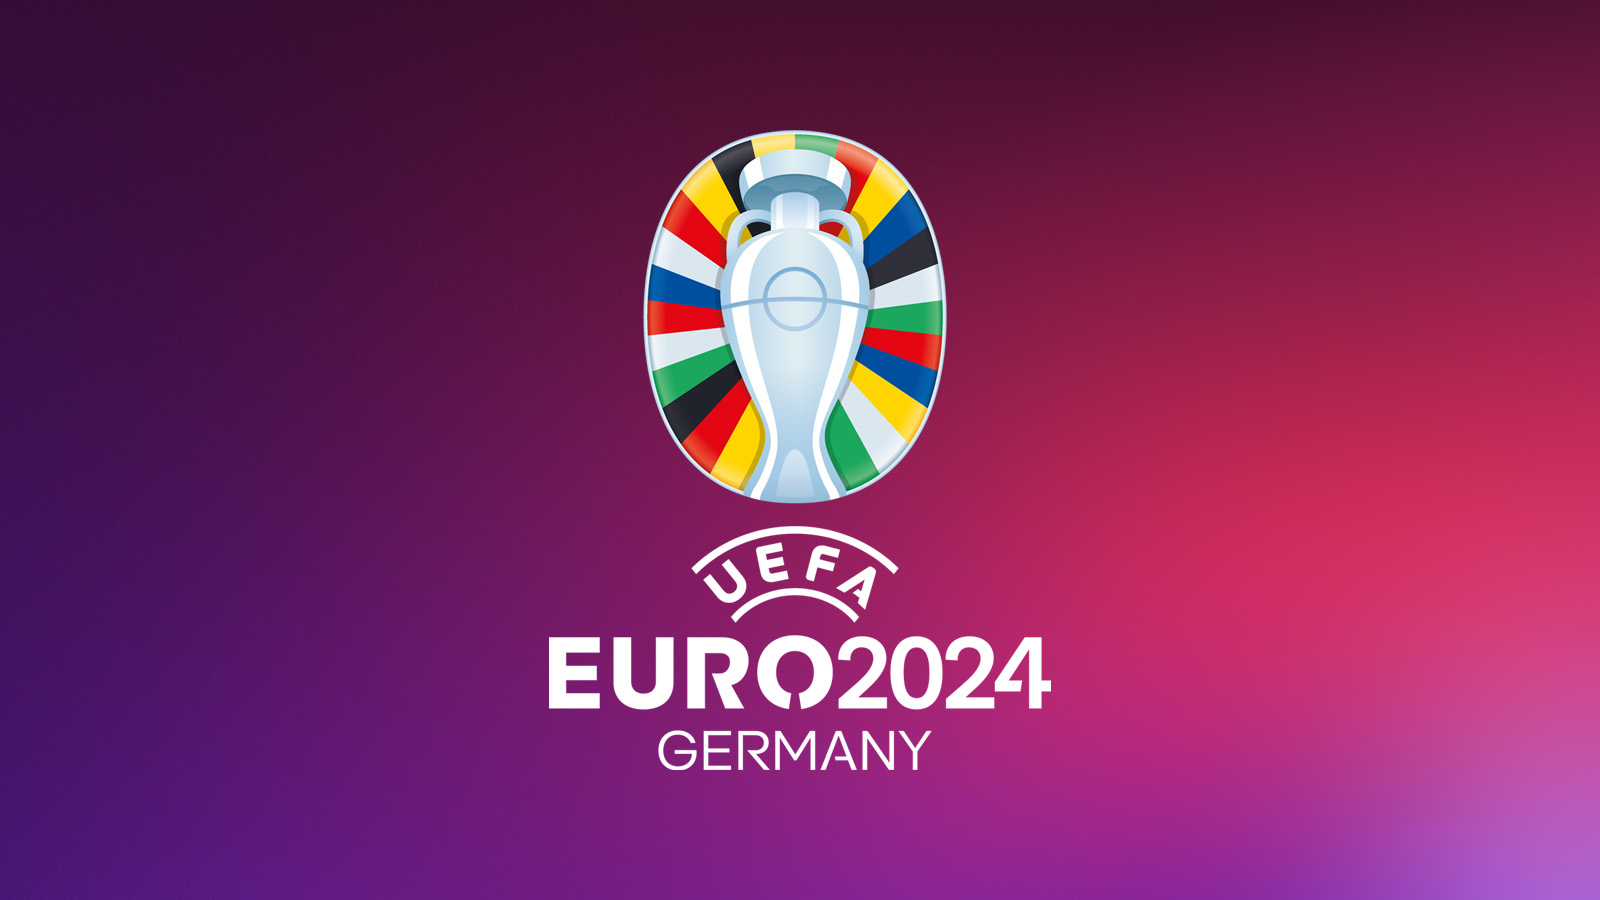 My predictions for the Euro 2024 group stage